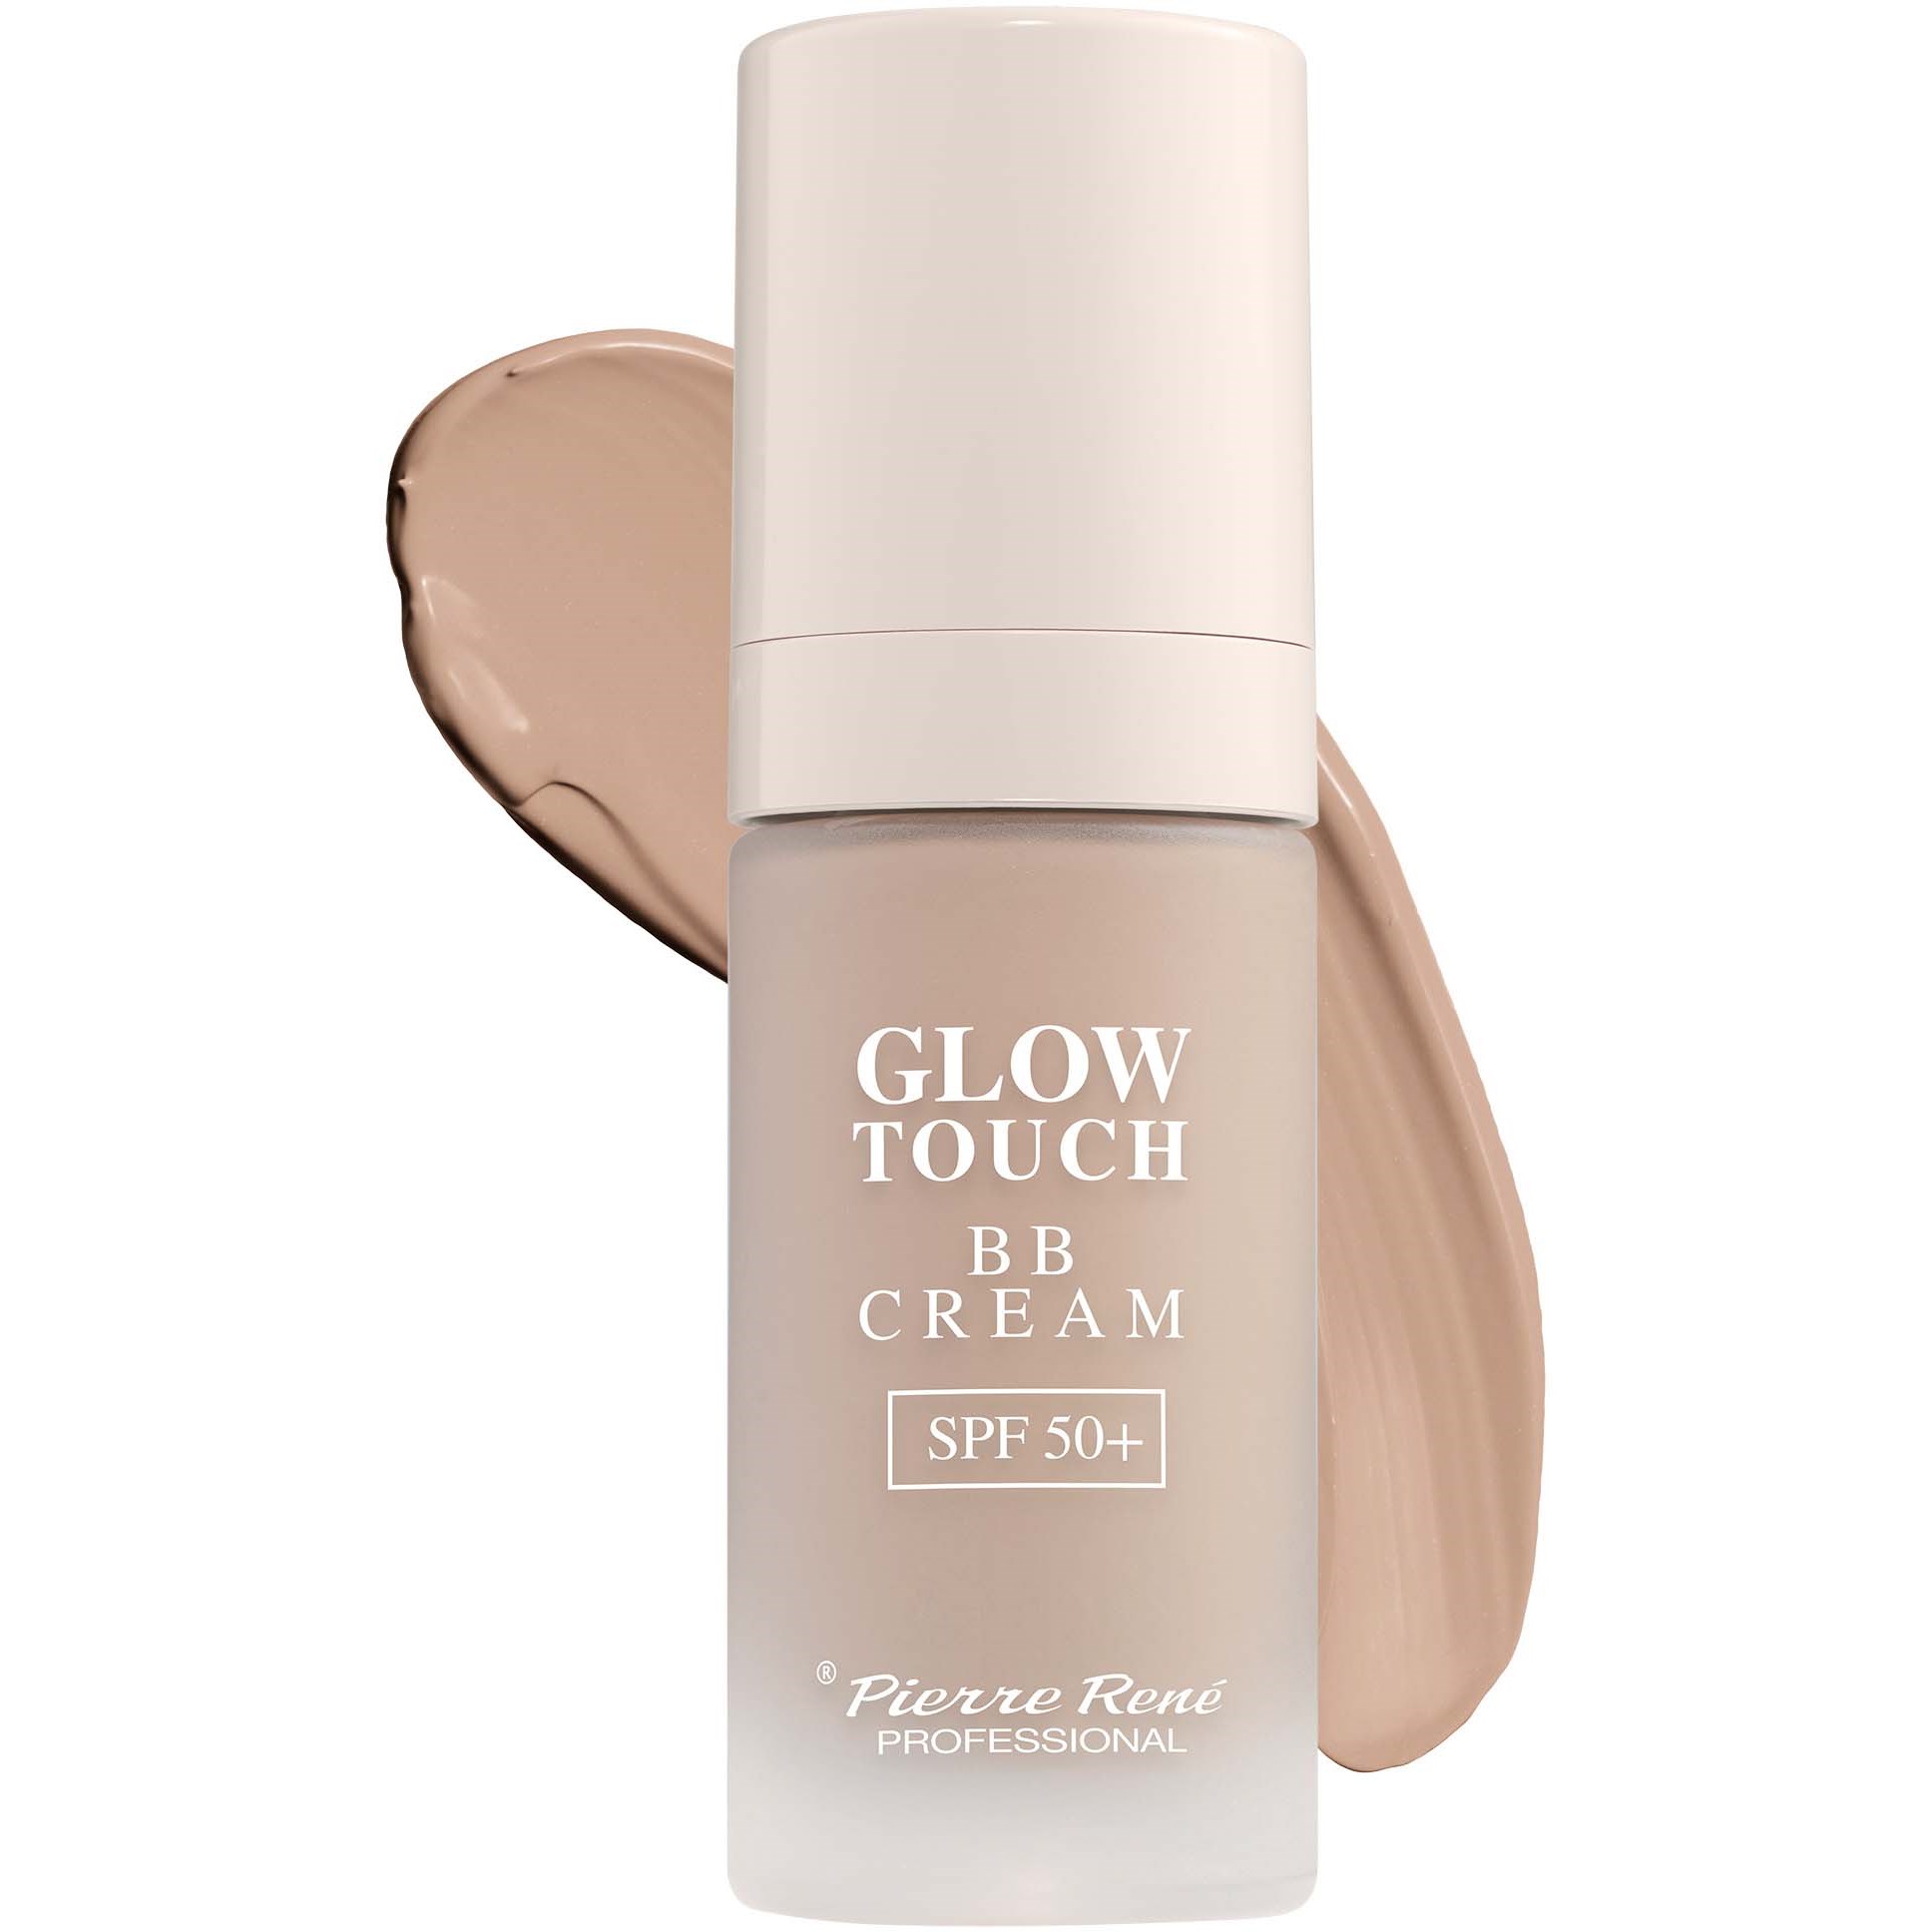 Pierre Rene BB Cream Glow Touch 02 Natural